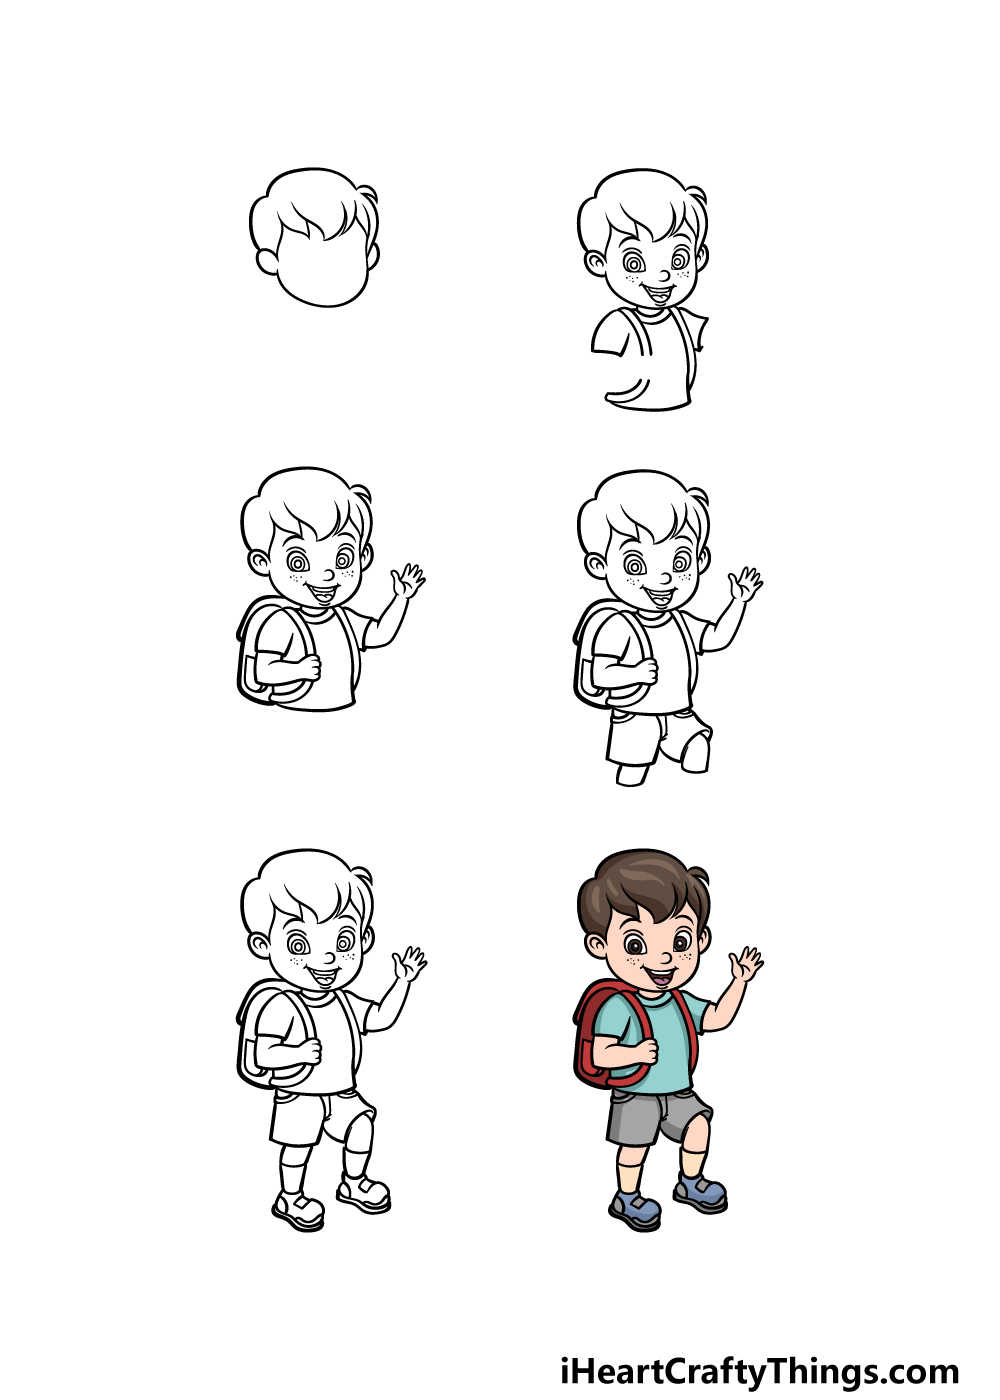 how to draw a Little Boy in 6 steps